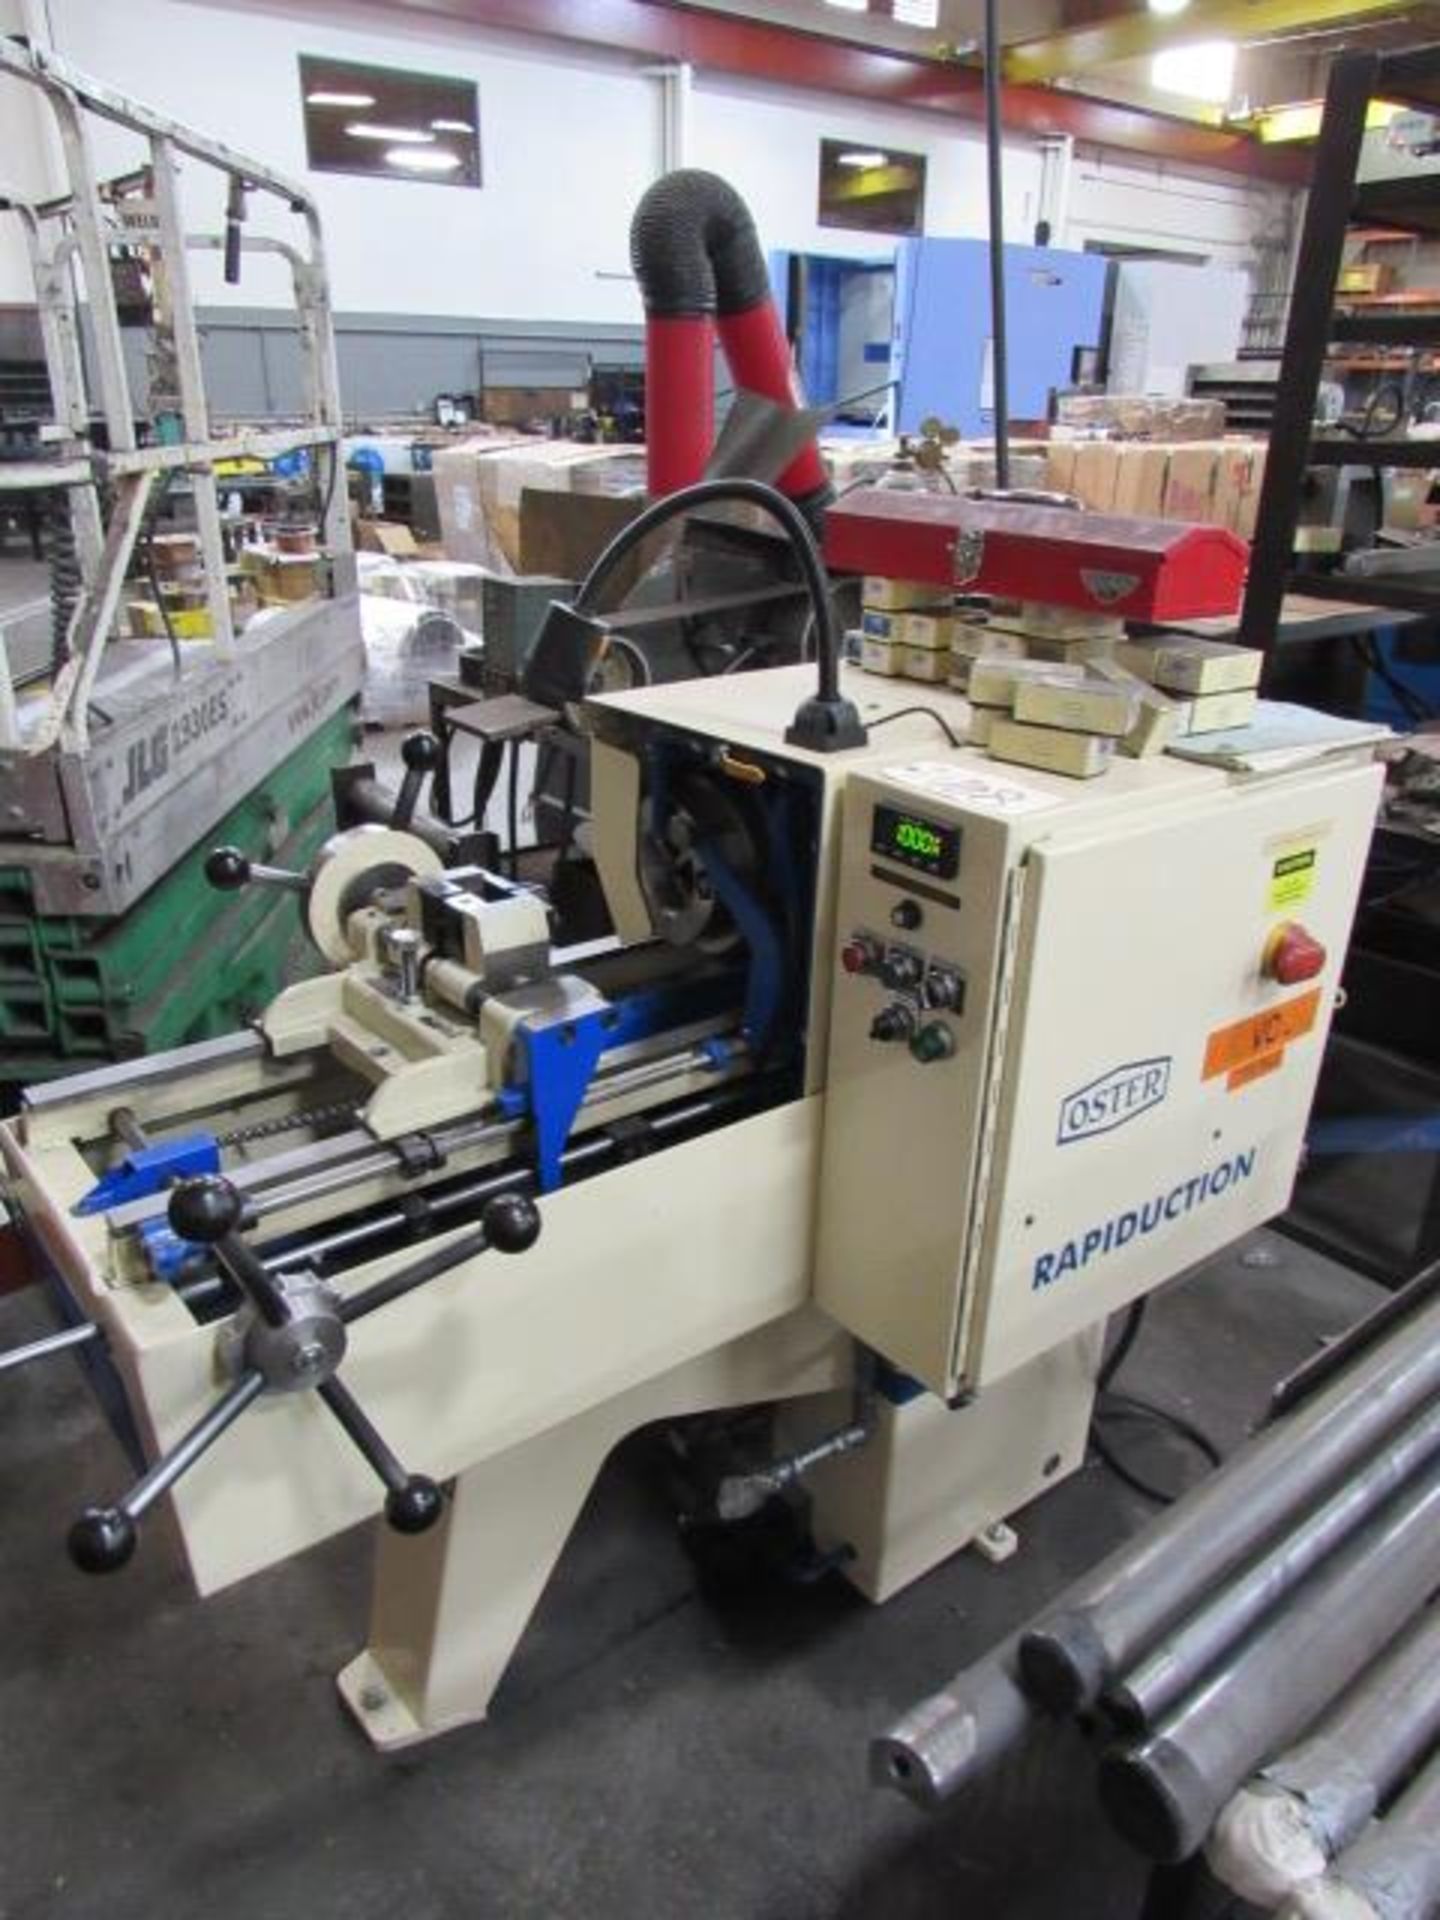 Oster 792A-LX Rapiduction Pipe & Bolt Threading Machine - Image 4 of 9